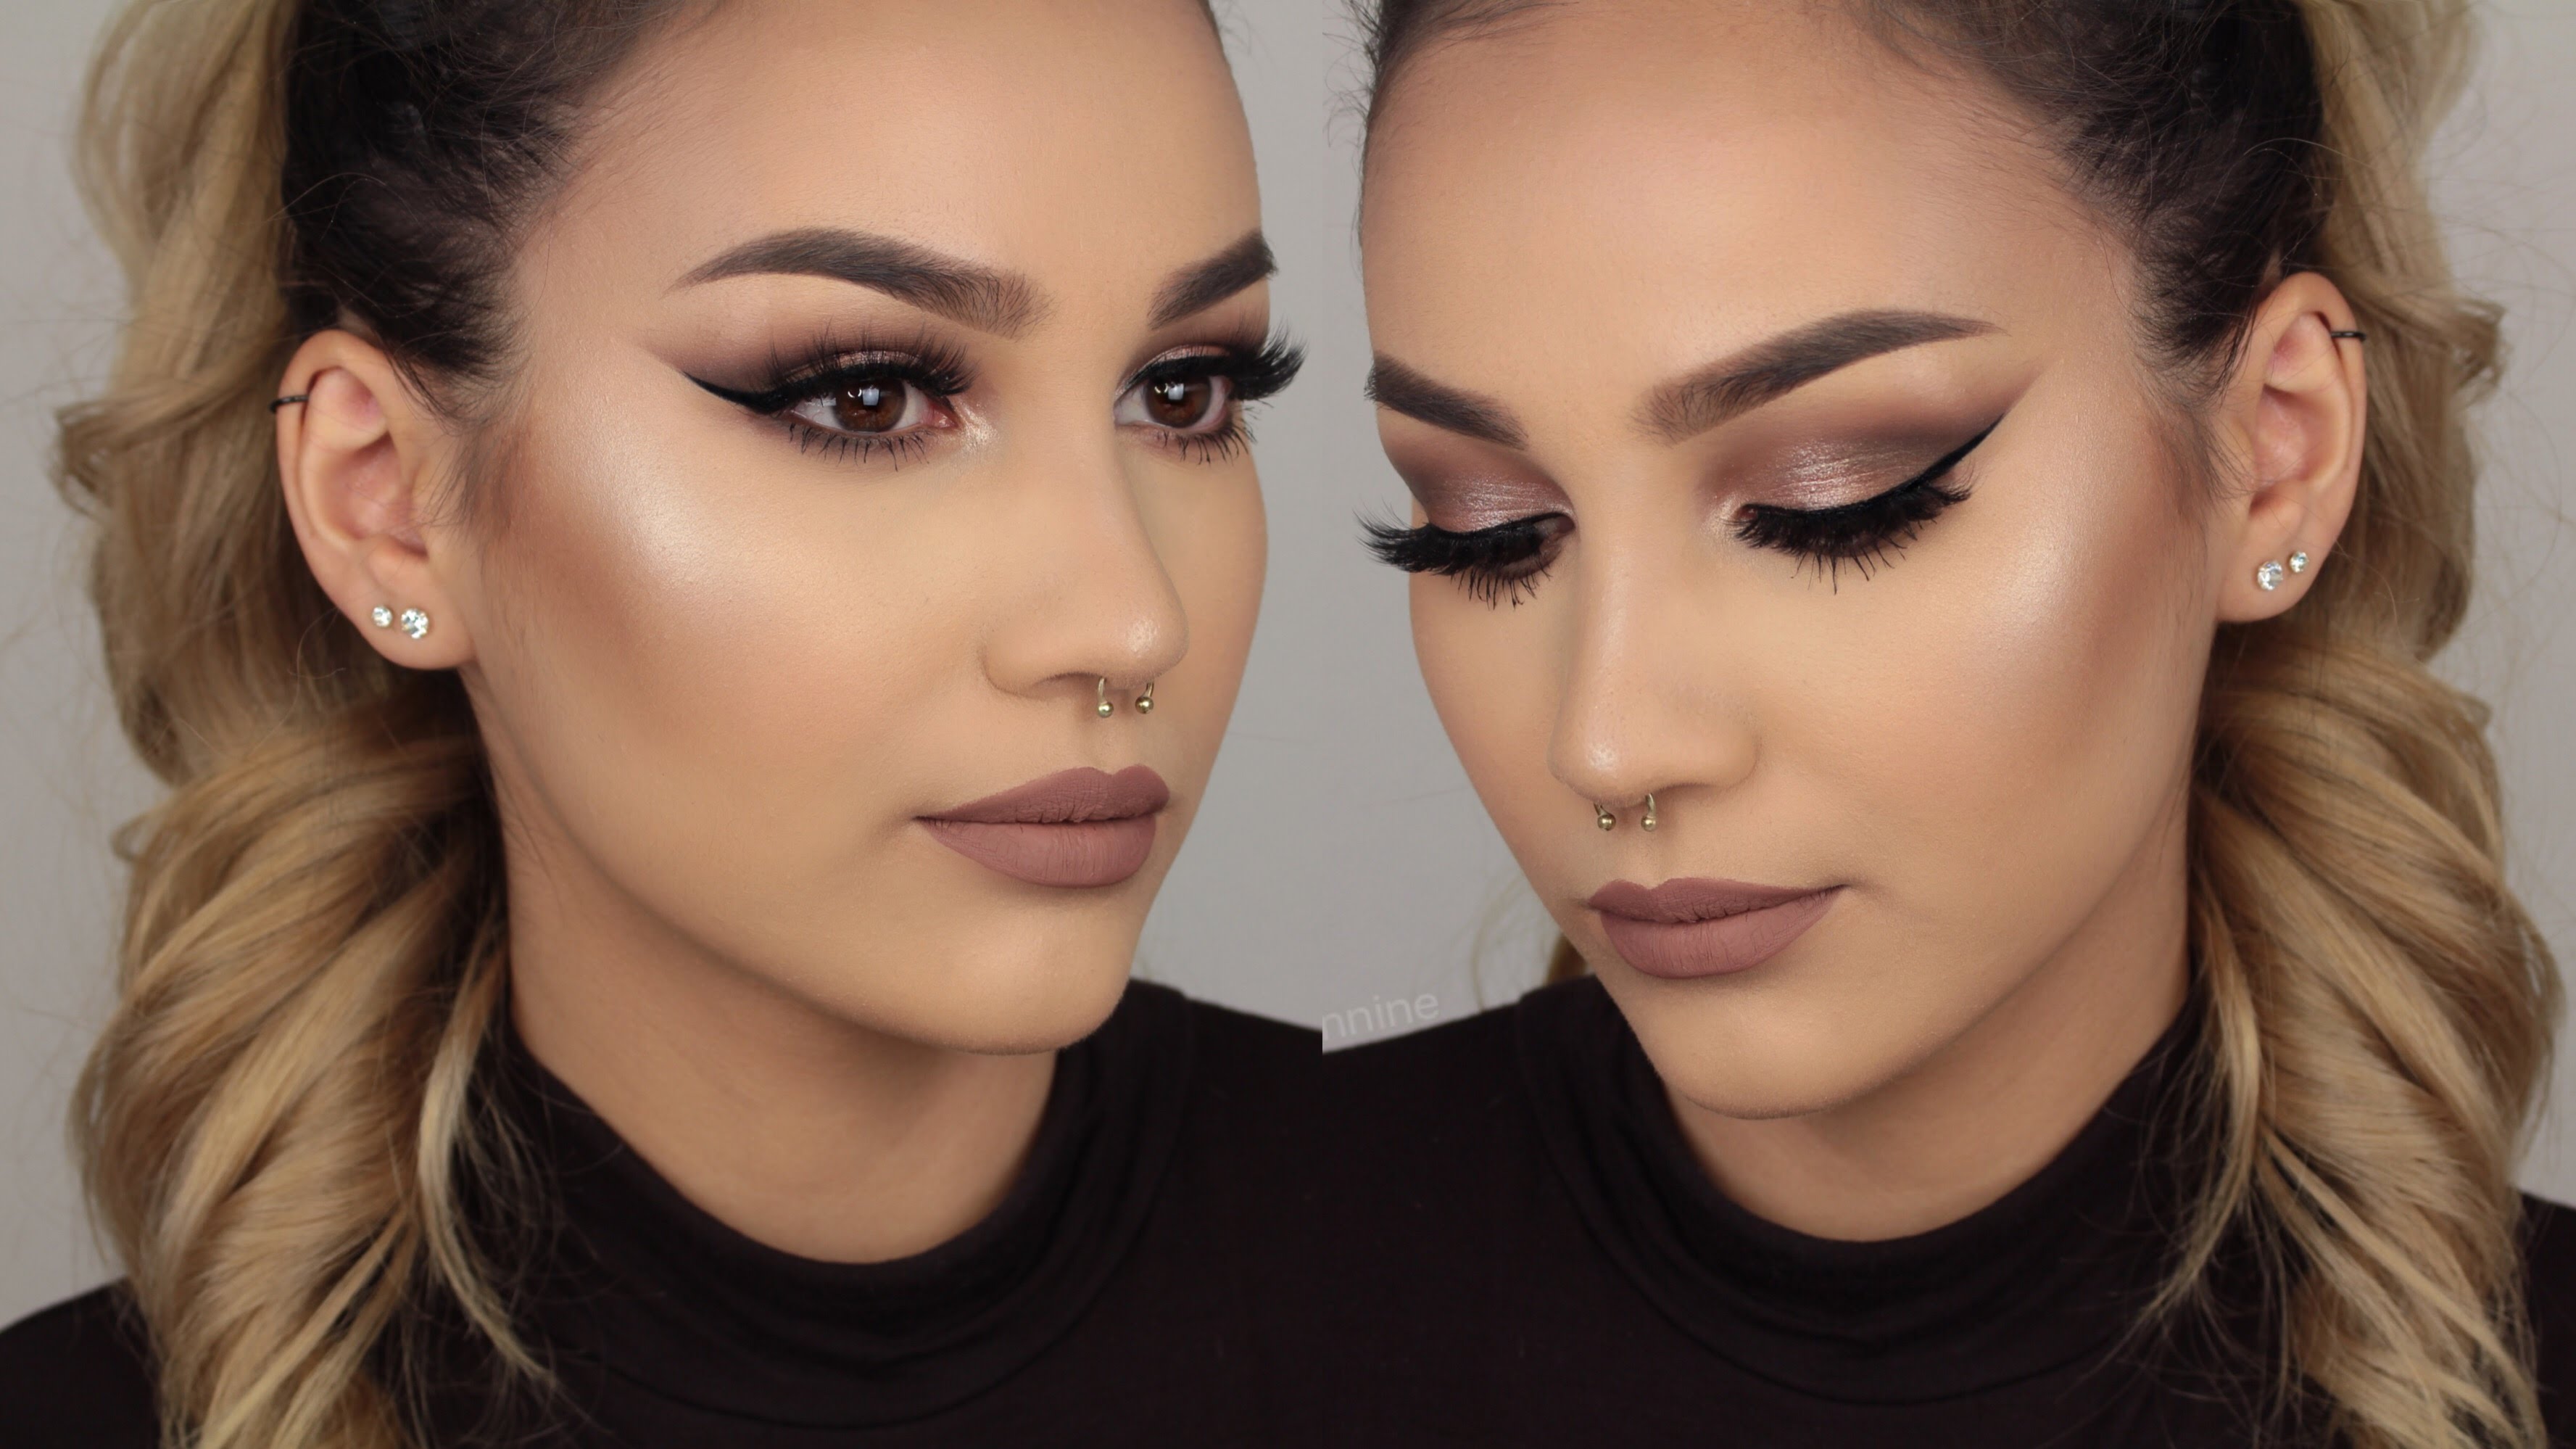 My GO TO GLAM Makeup Look | ByJeannine - YouTube